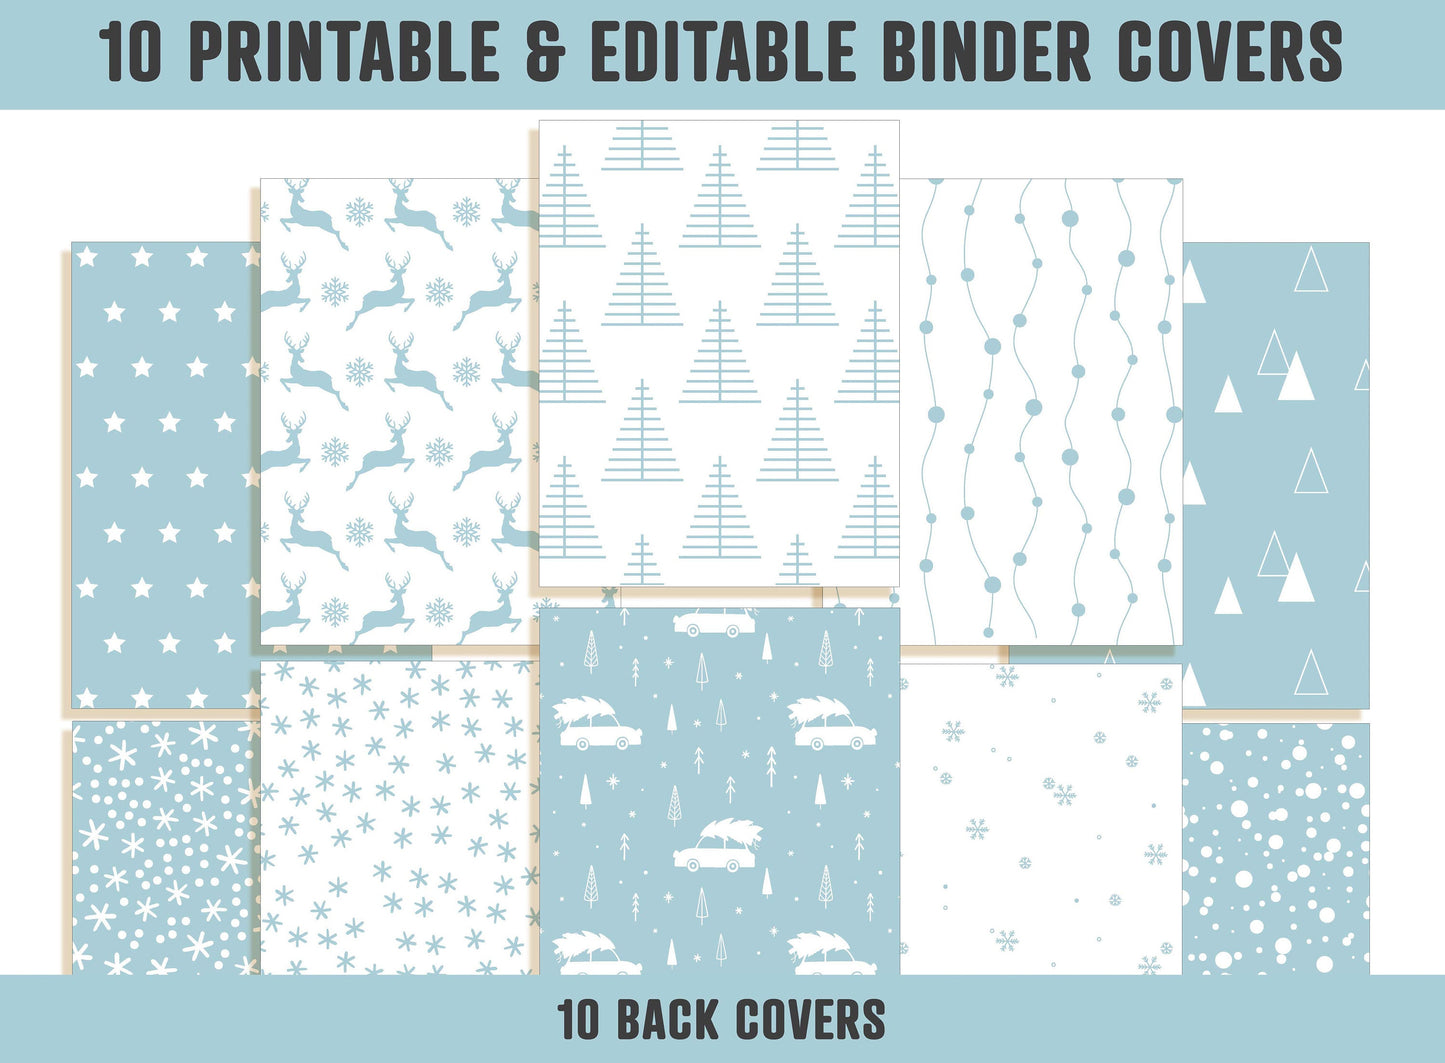 Holiday Planner Cover, 10 Editable Binder Covers and Spines Winter/Christmas Binder Cover Printable Teacher/School Binder Page Binder Insert